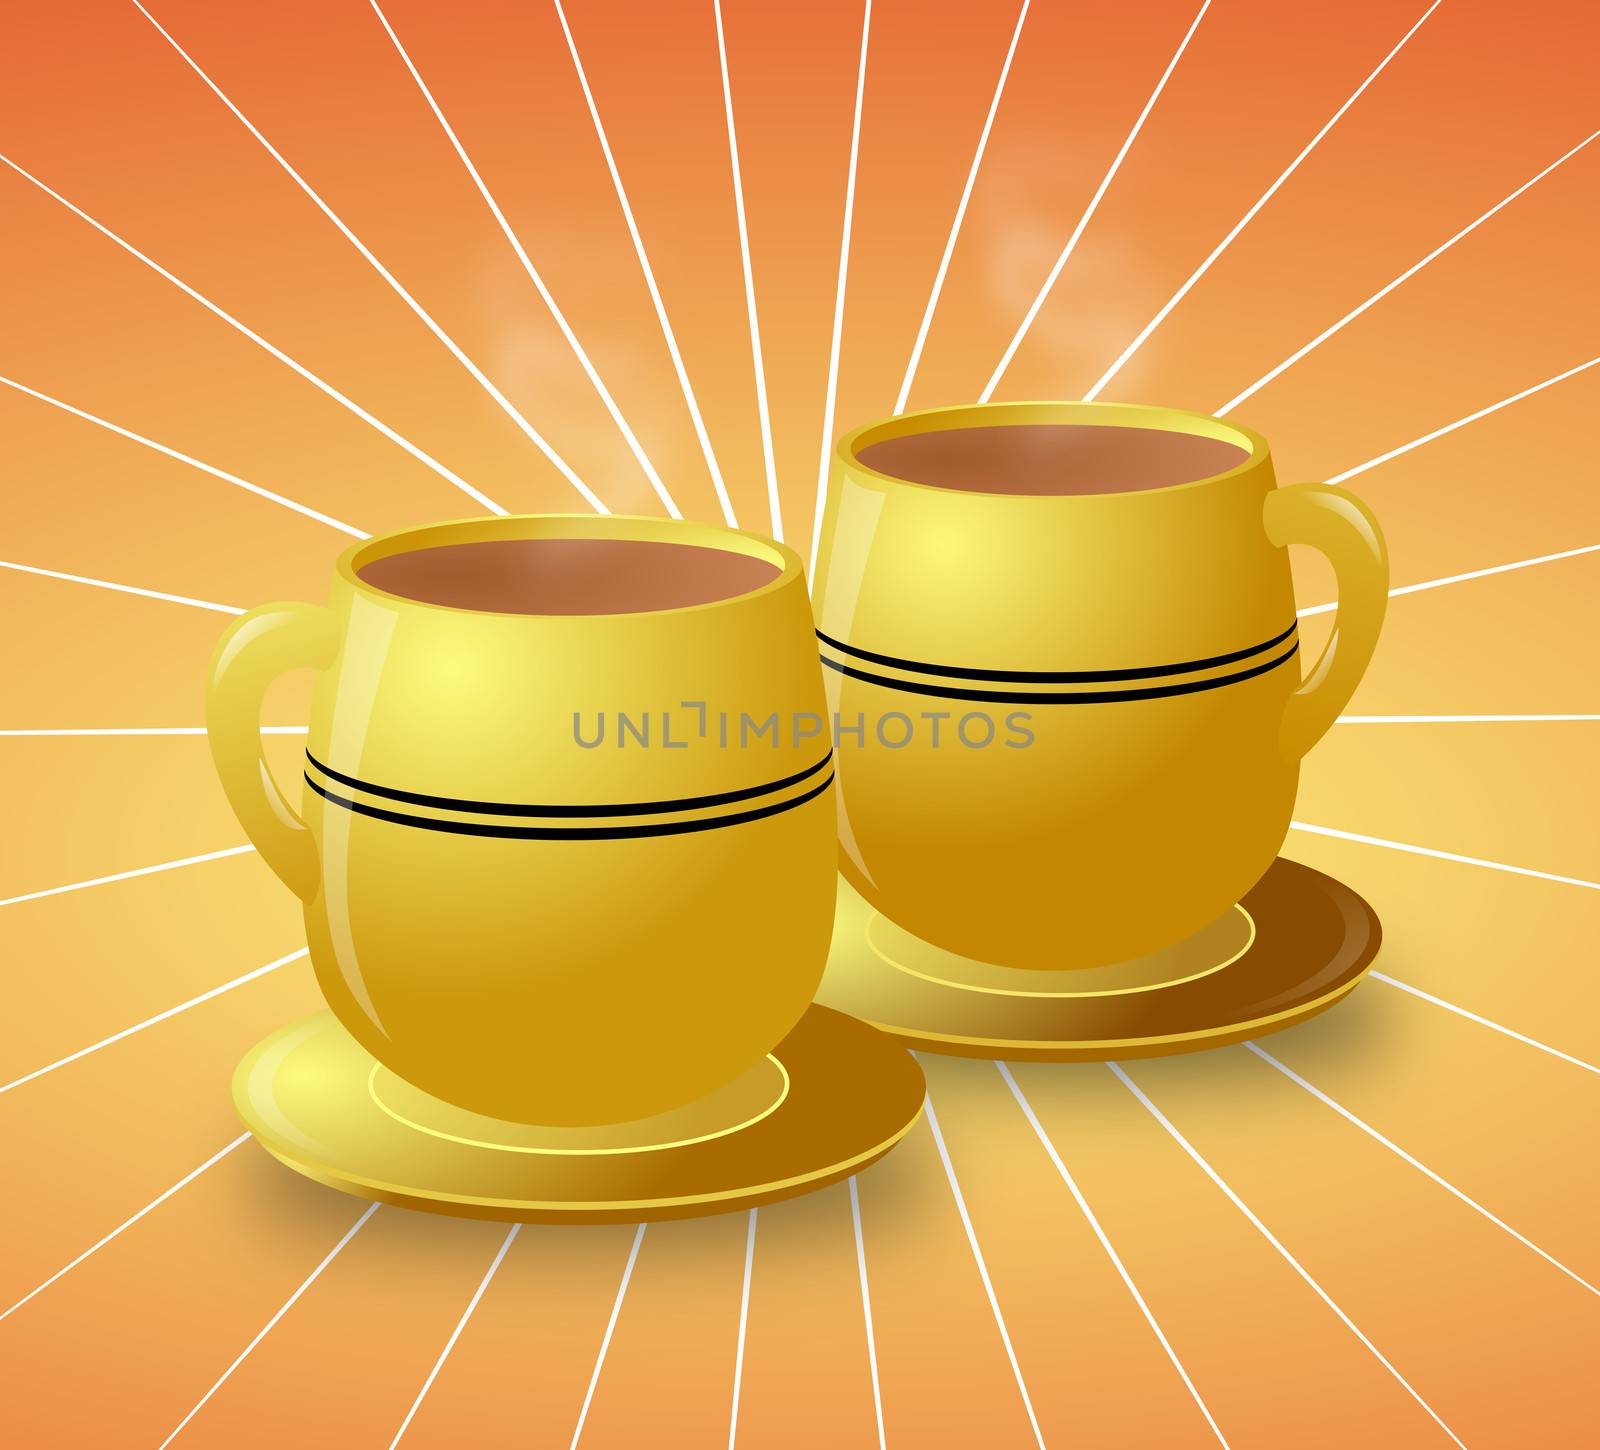 Illustration of two yellow cups of steaming hot coffee against a bright starburst background 
